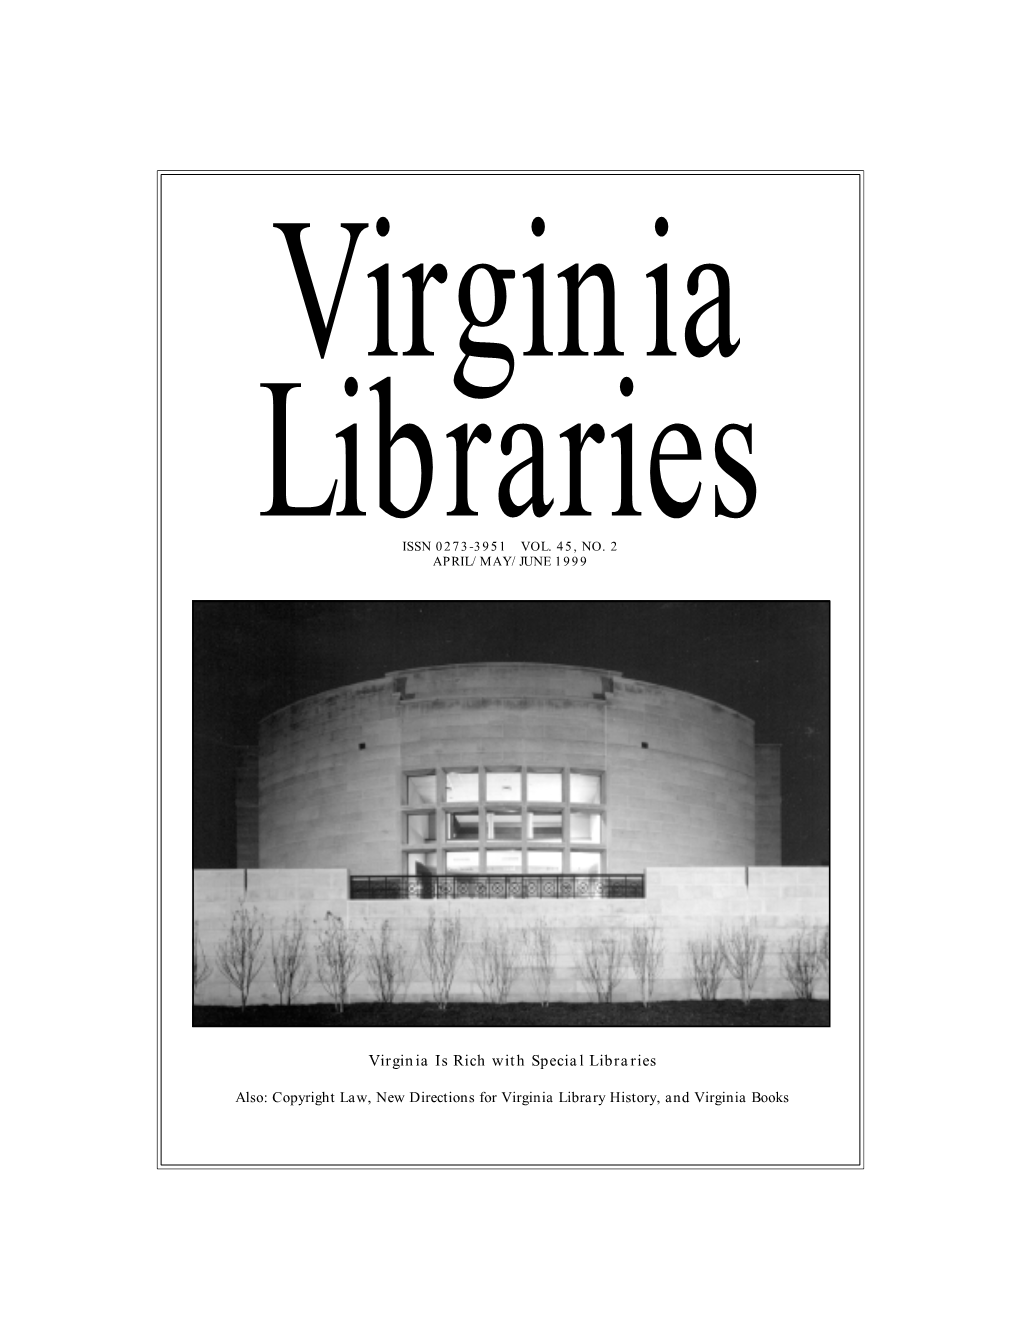 Virginia Is Rich with Special Libraries